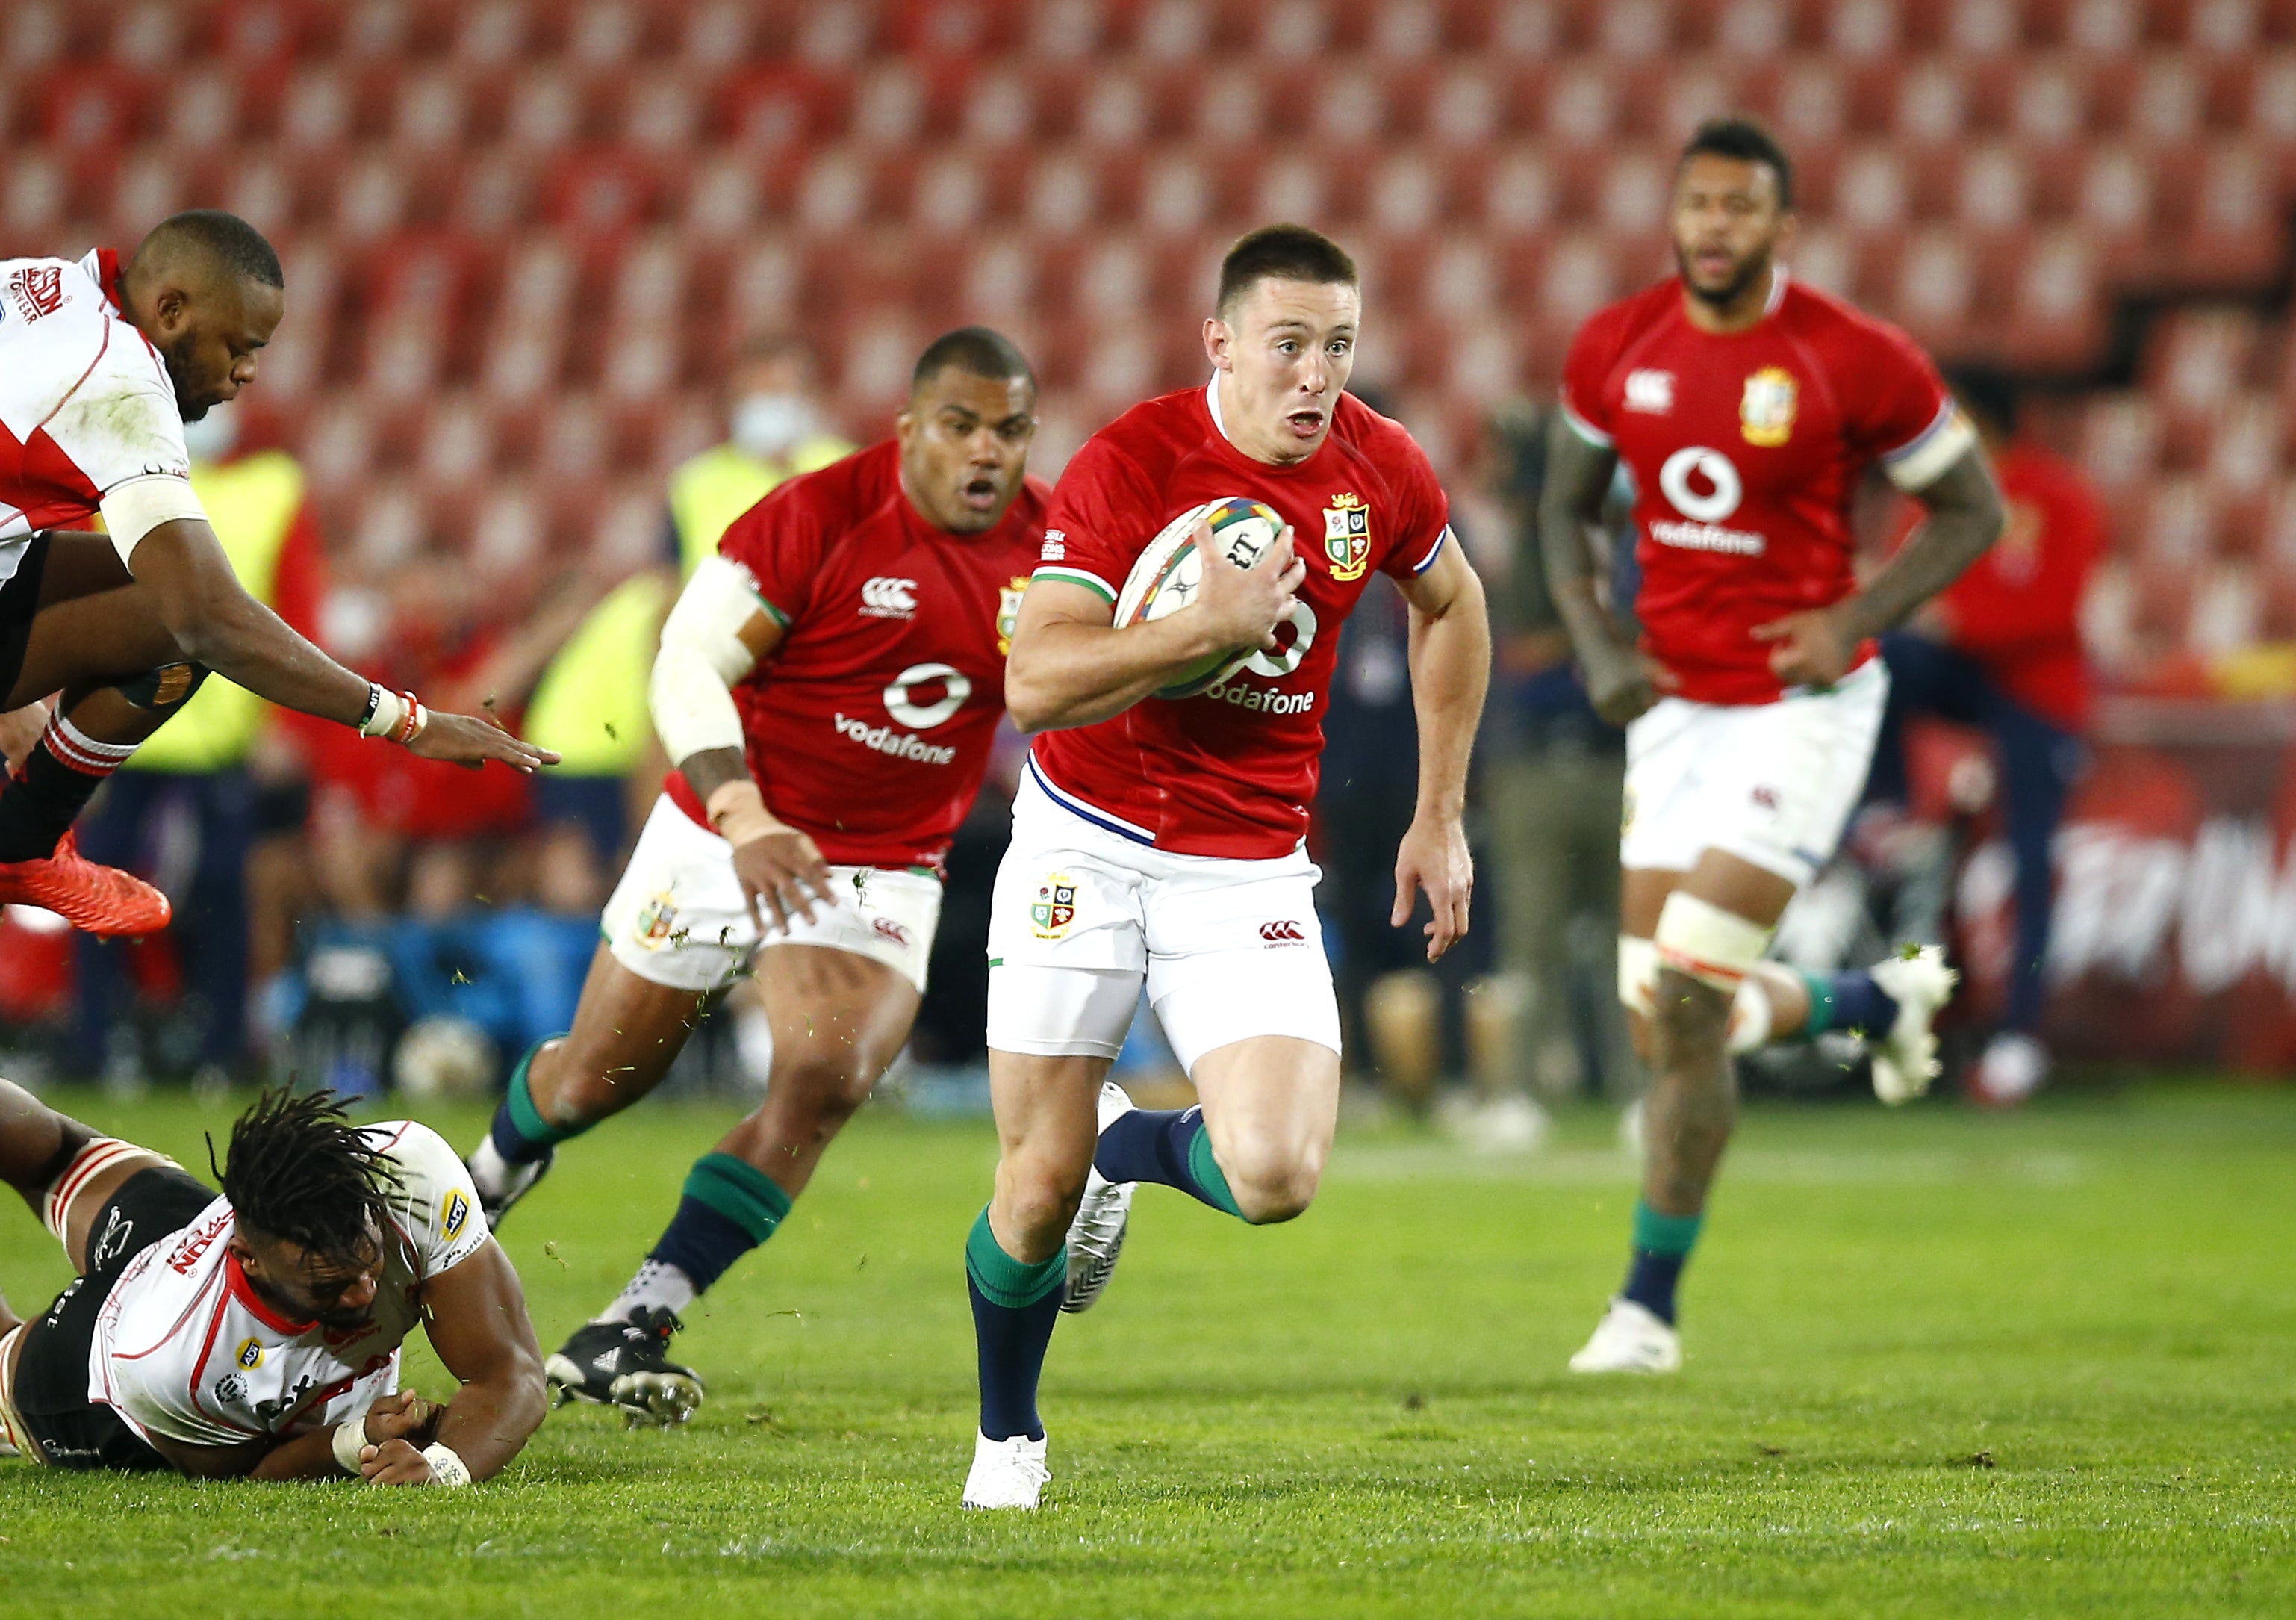 Adams, centre, ran in four tries against Emirates Lions in Johannesburg